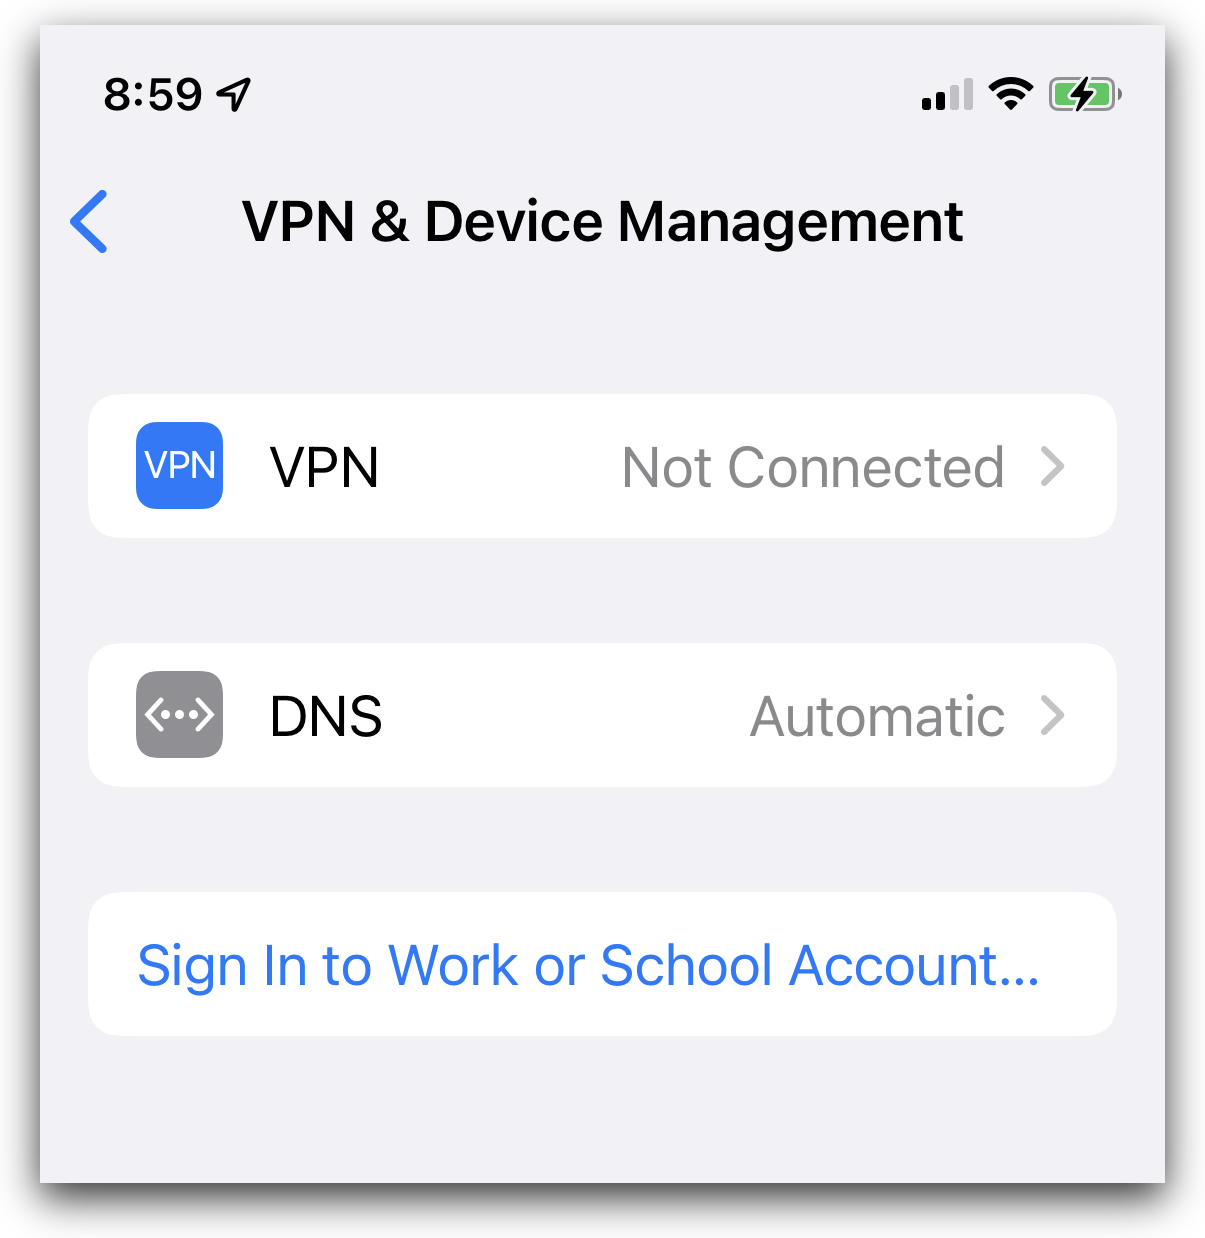 VPN & Device Management settings screen has no relevant settings